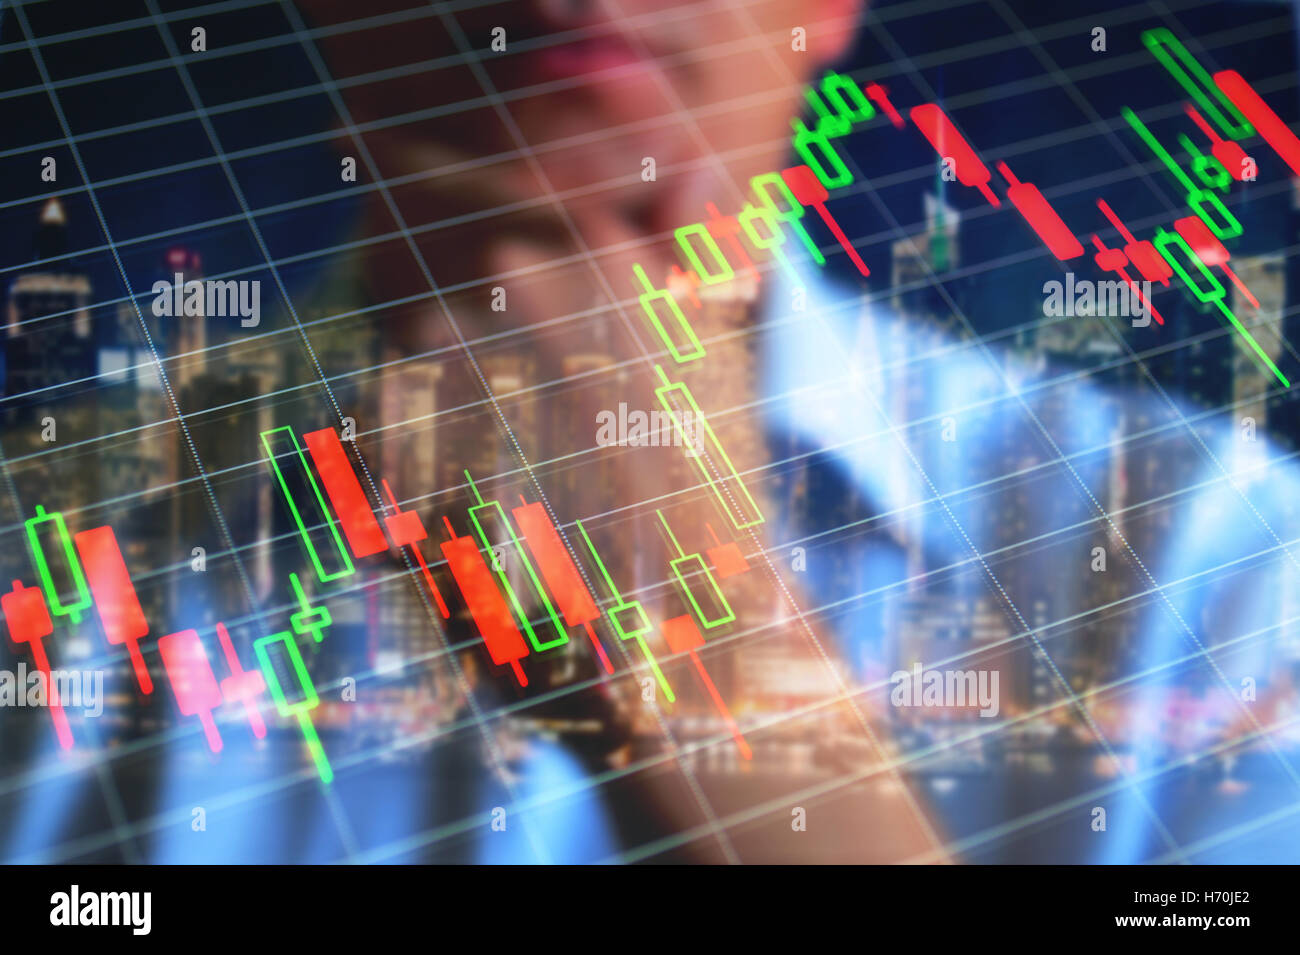 Stock market chart, stock market, financial market, forex, economy background. Person trader at background of screen with volatile stock market graph. Stock Photo